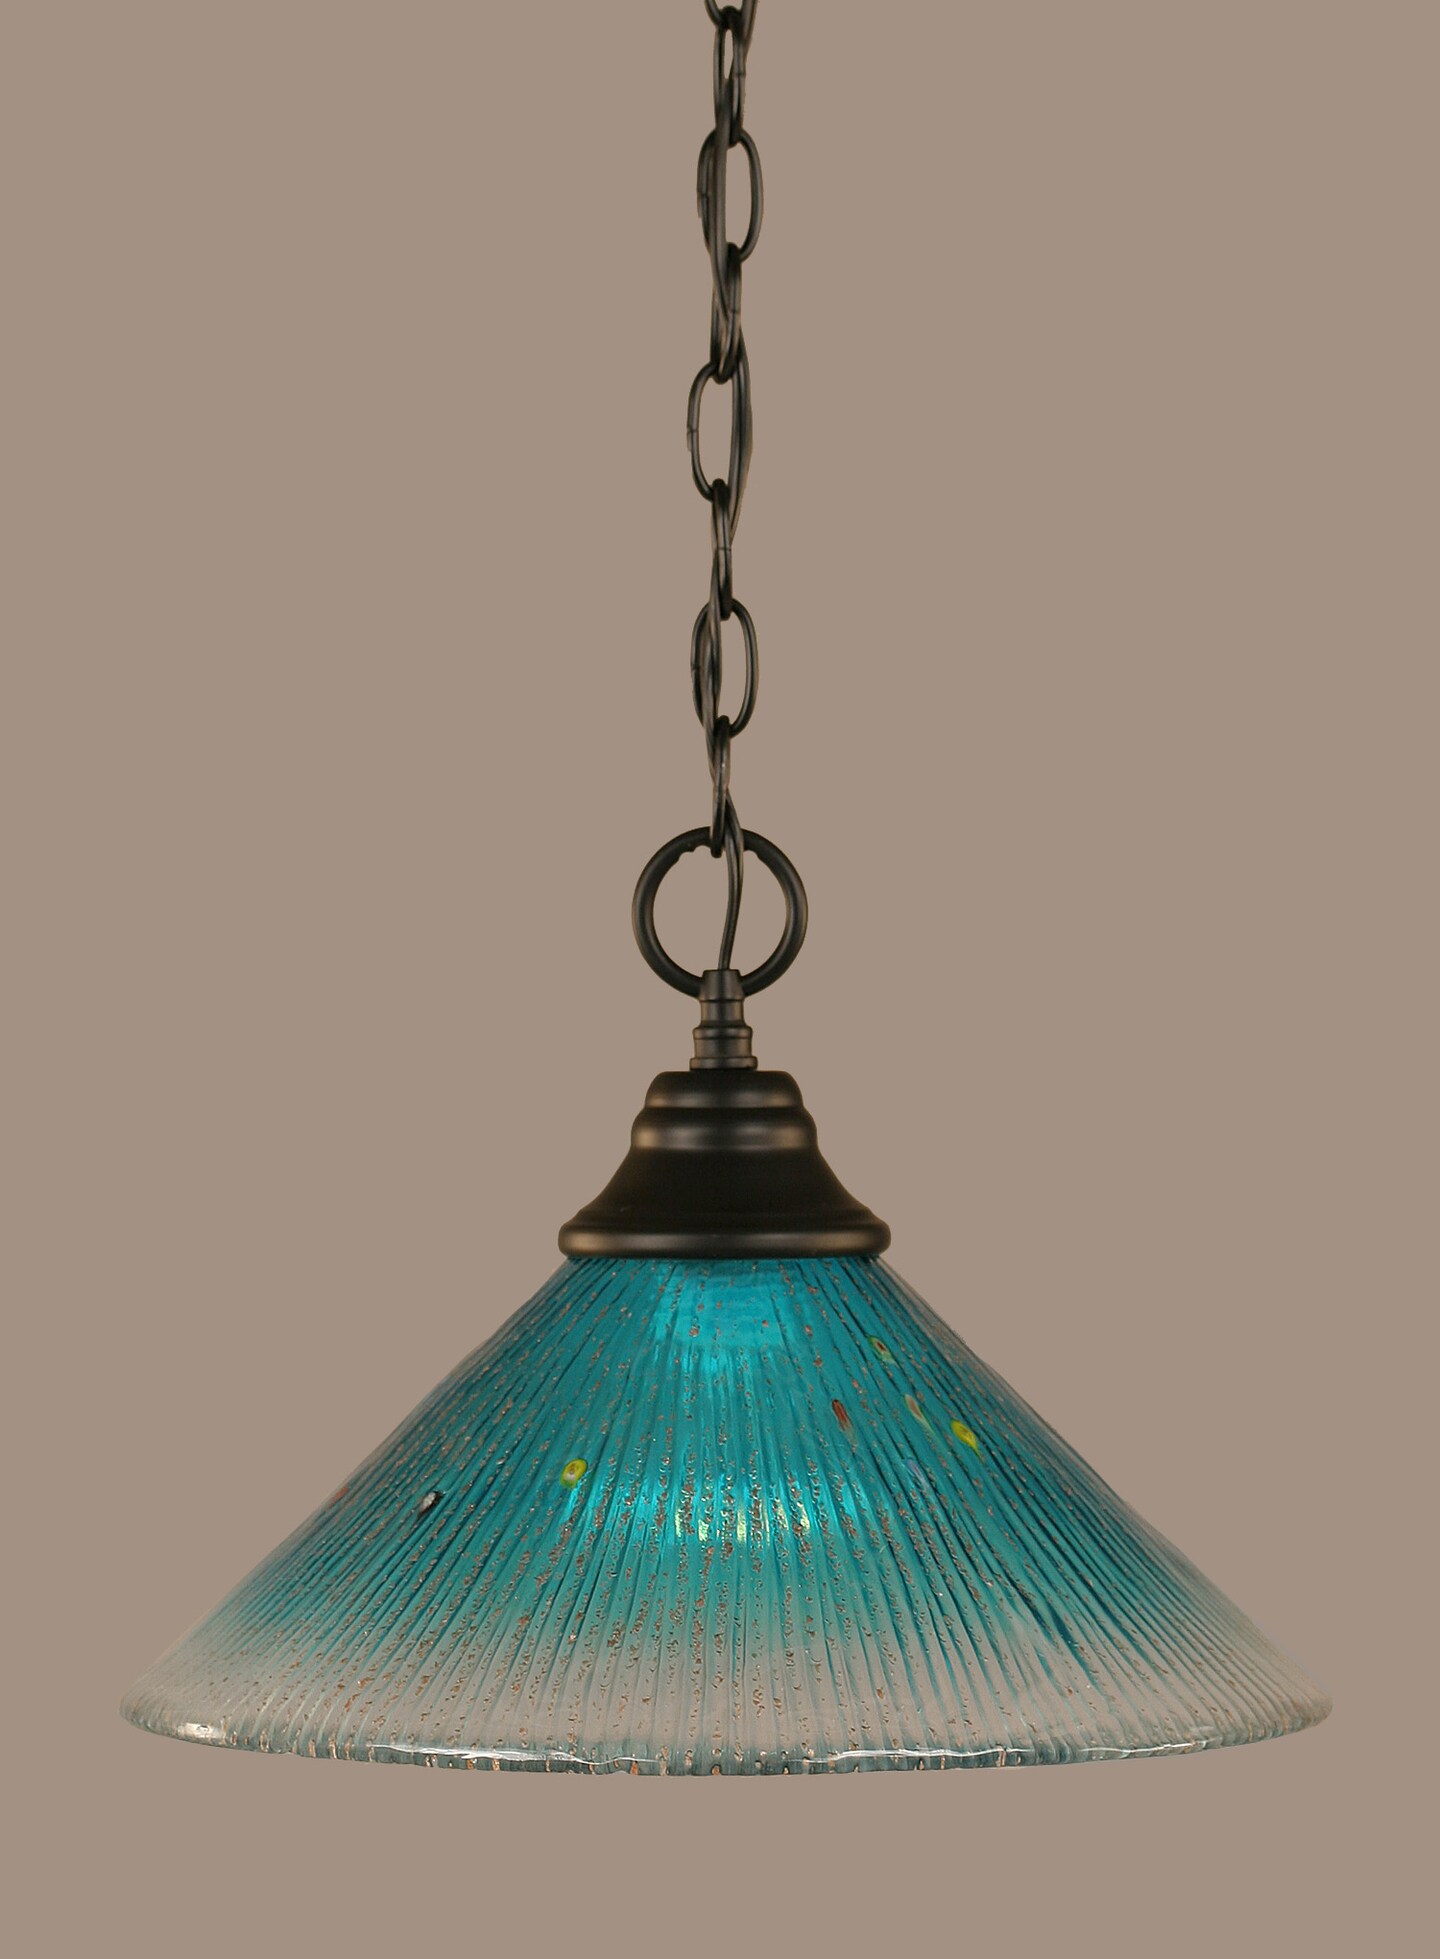 Chain Hung Pendant Shown In Matte Black Finish With 12 Teal Crystal Glass